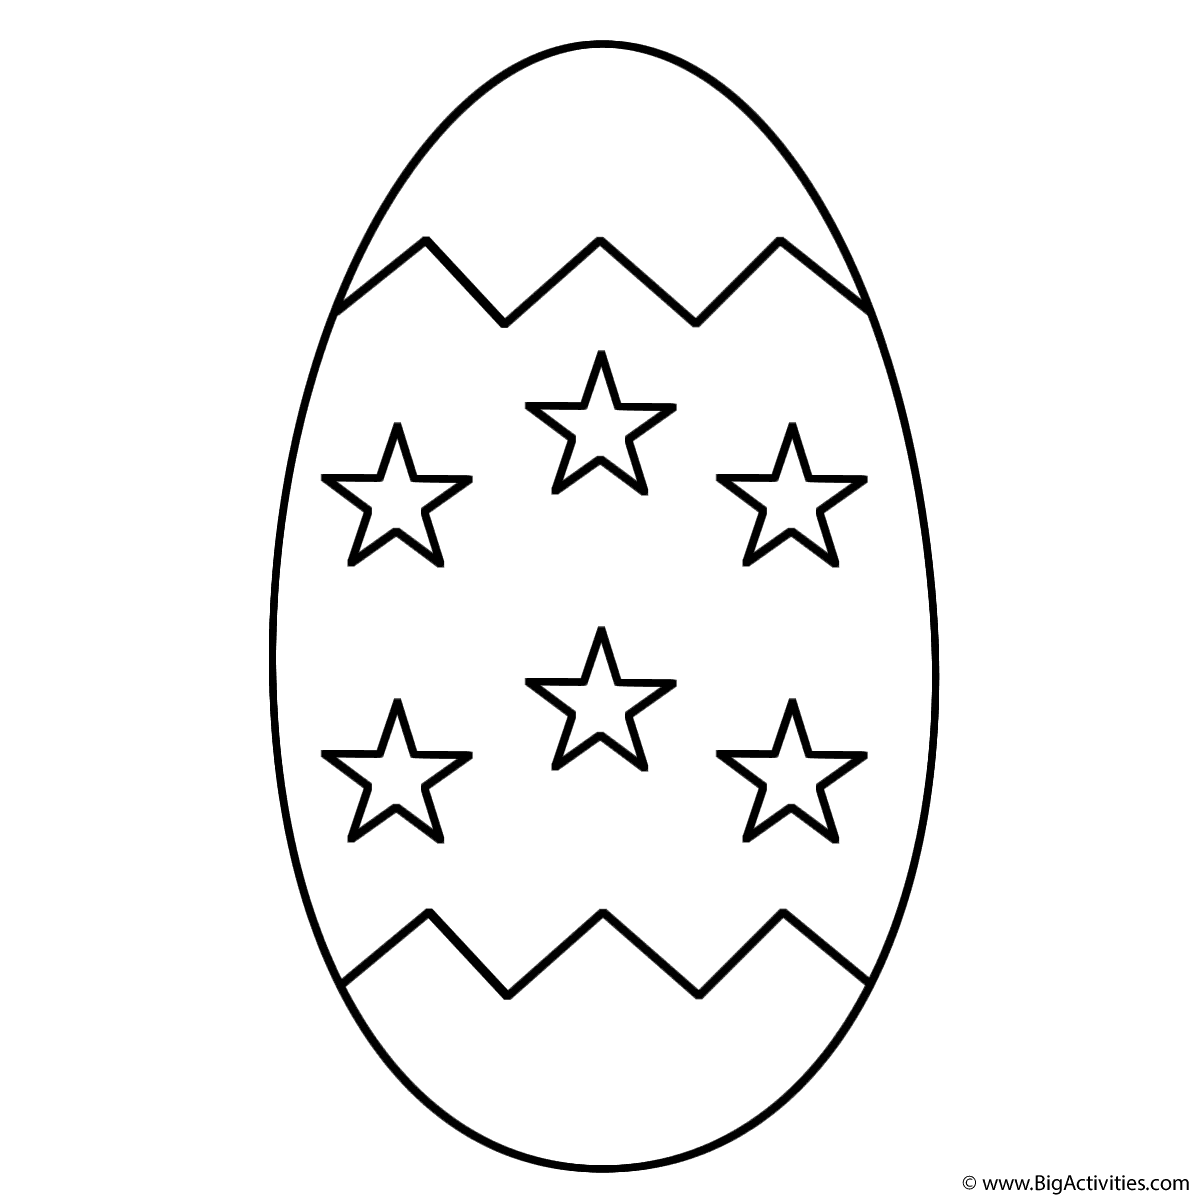 Download Easter Egg with stars - Coloring Page (Easter)